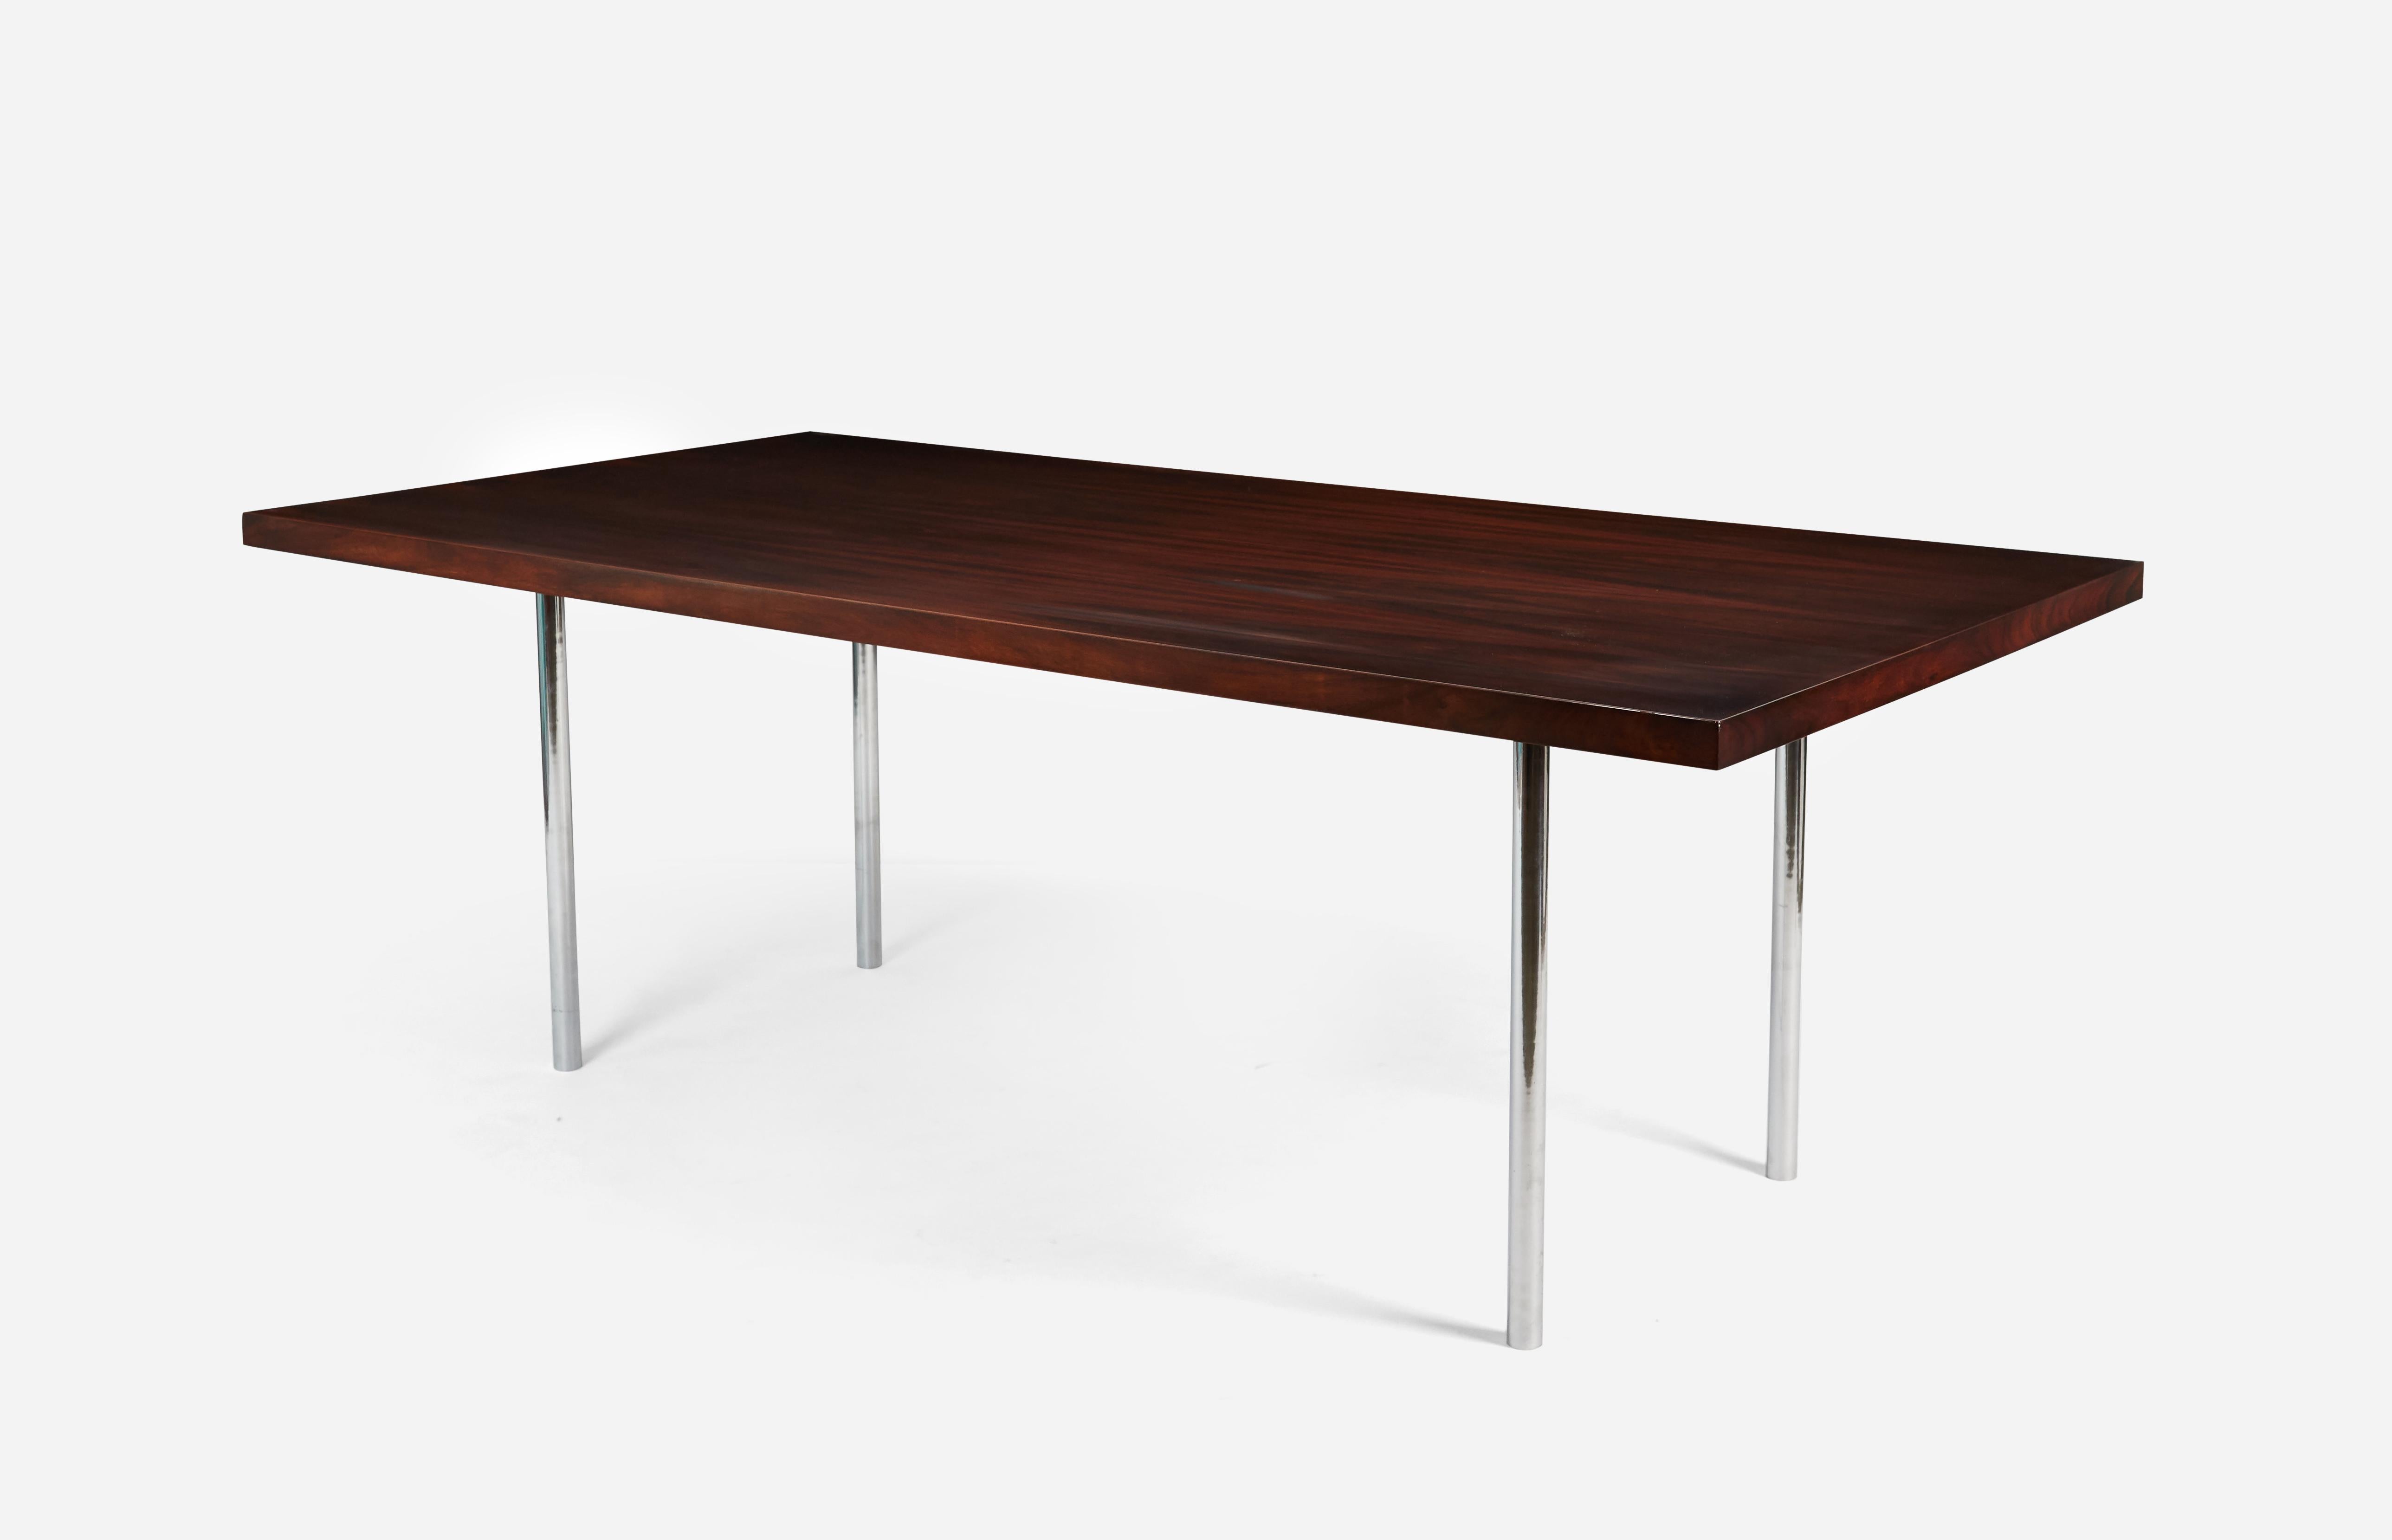 Beautiful rosewood dining table with solid stainless steel legs, circa 1960s. Ludwig Mies van der Rohe had this same model of table in his own apartment in Chicago. Fully restored, refinished.